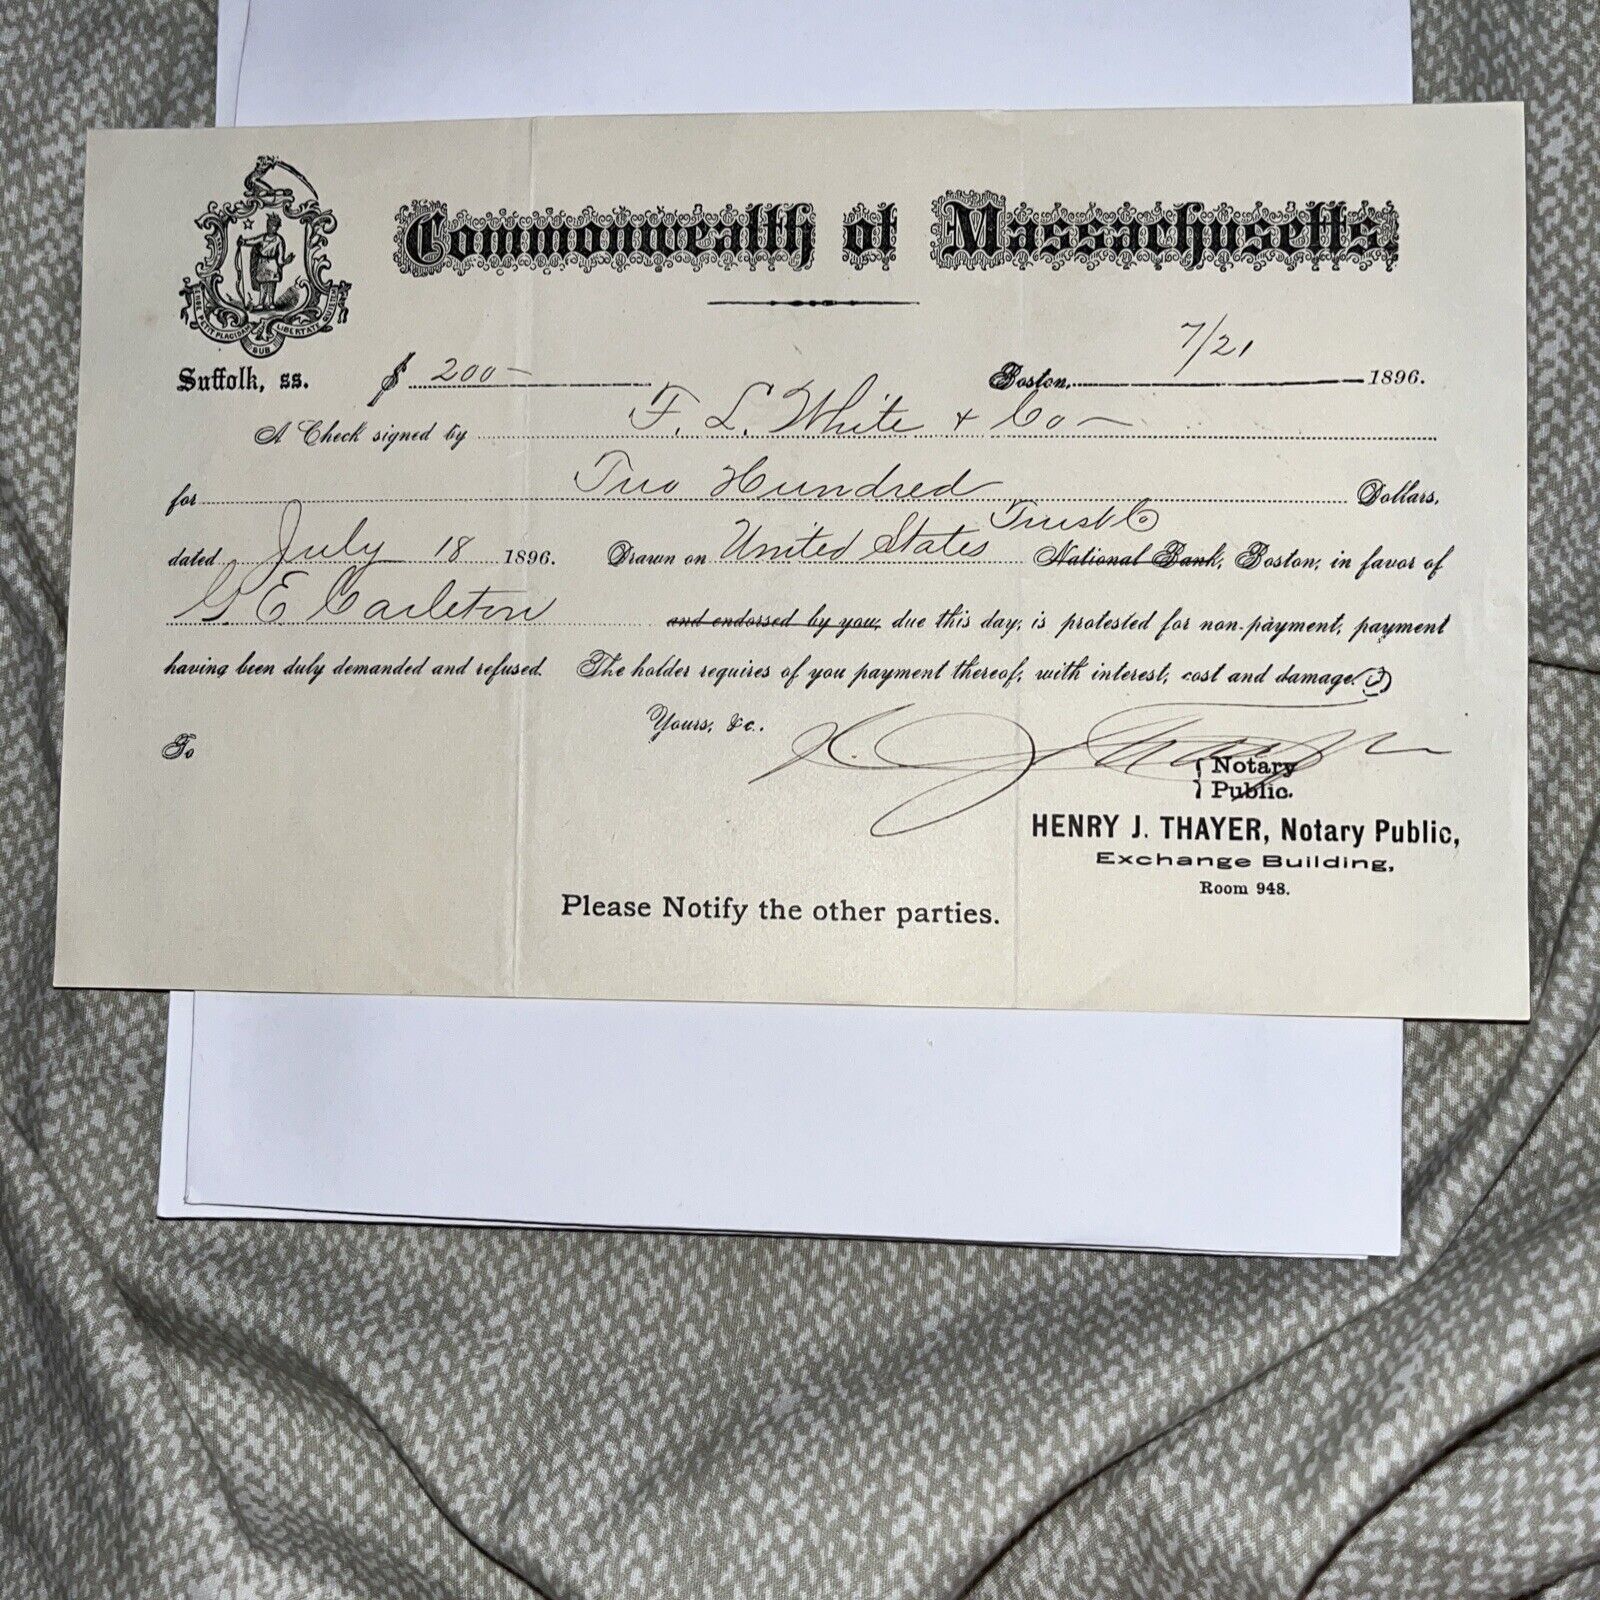 1896 Commonwealth of Massachusetts Demand for Bounced Check Non-Payment - Boston